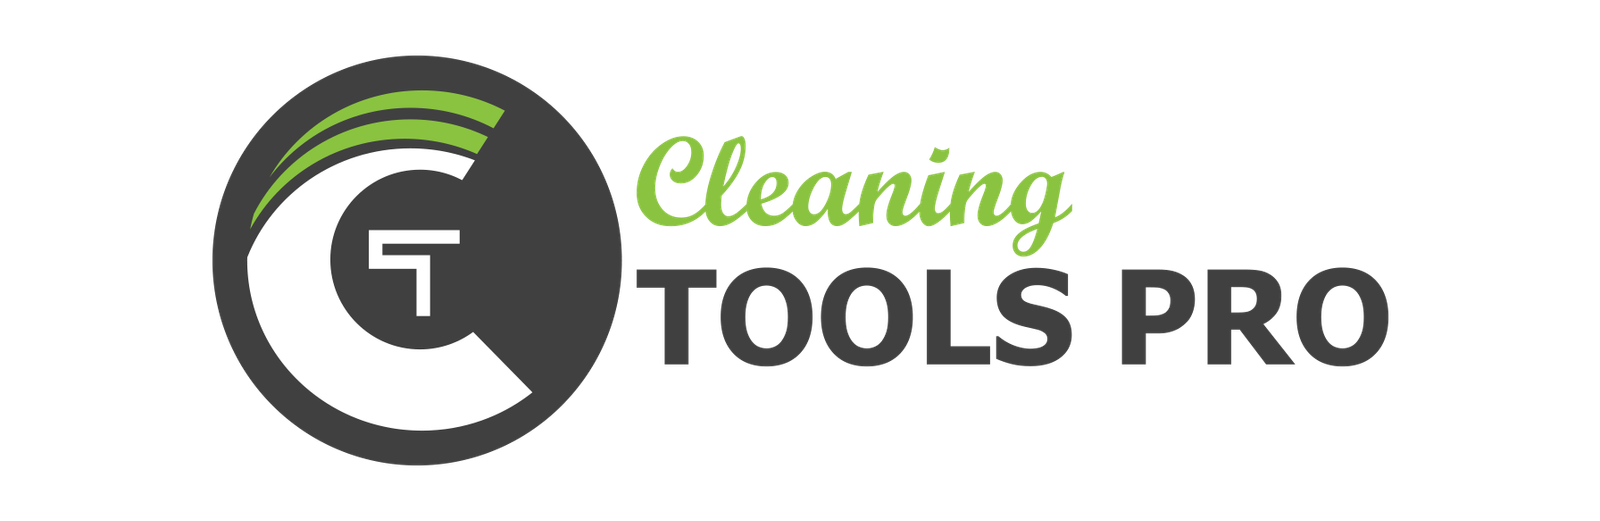 Cleaning Pro logo